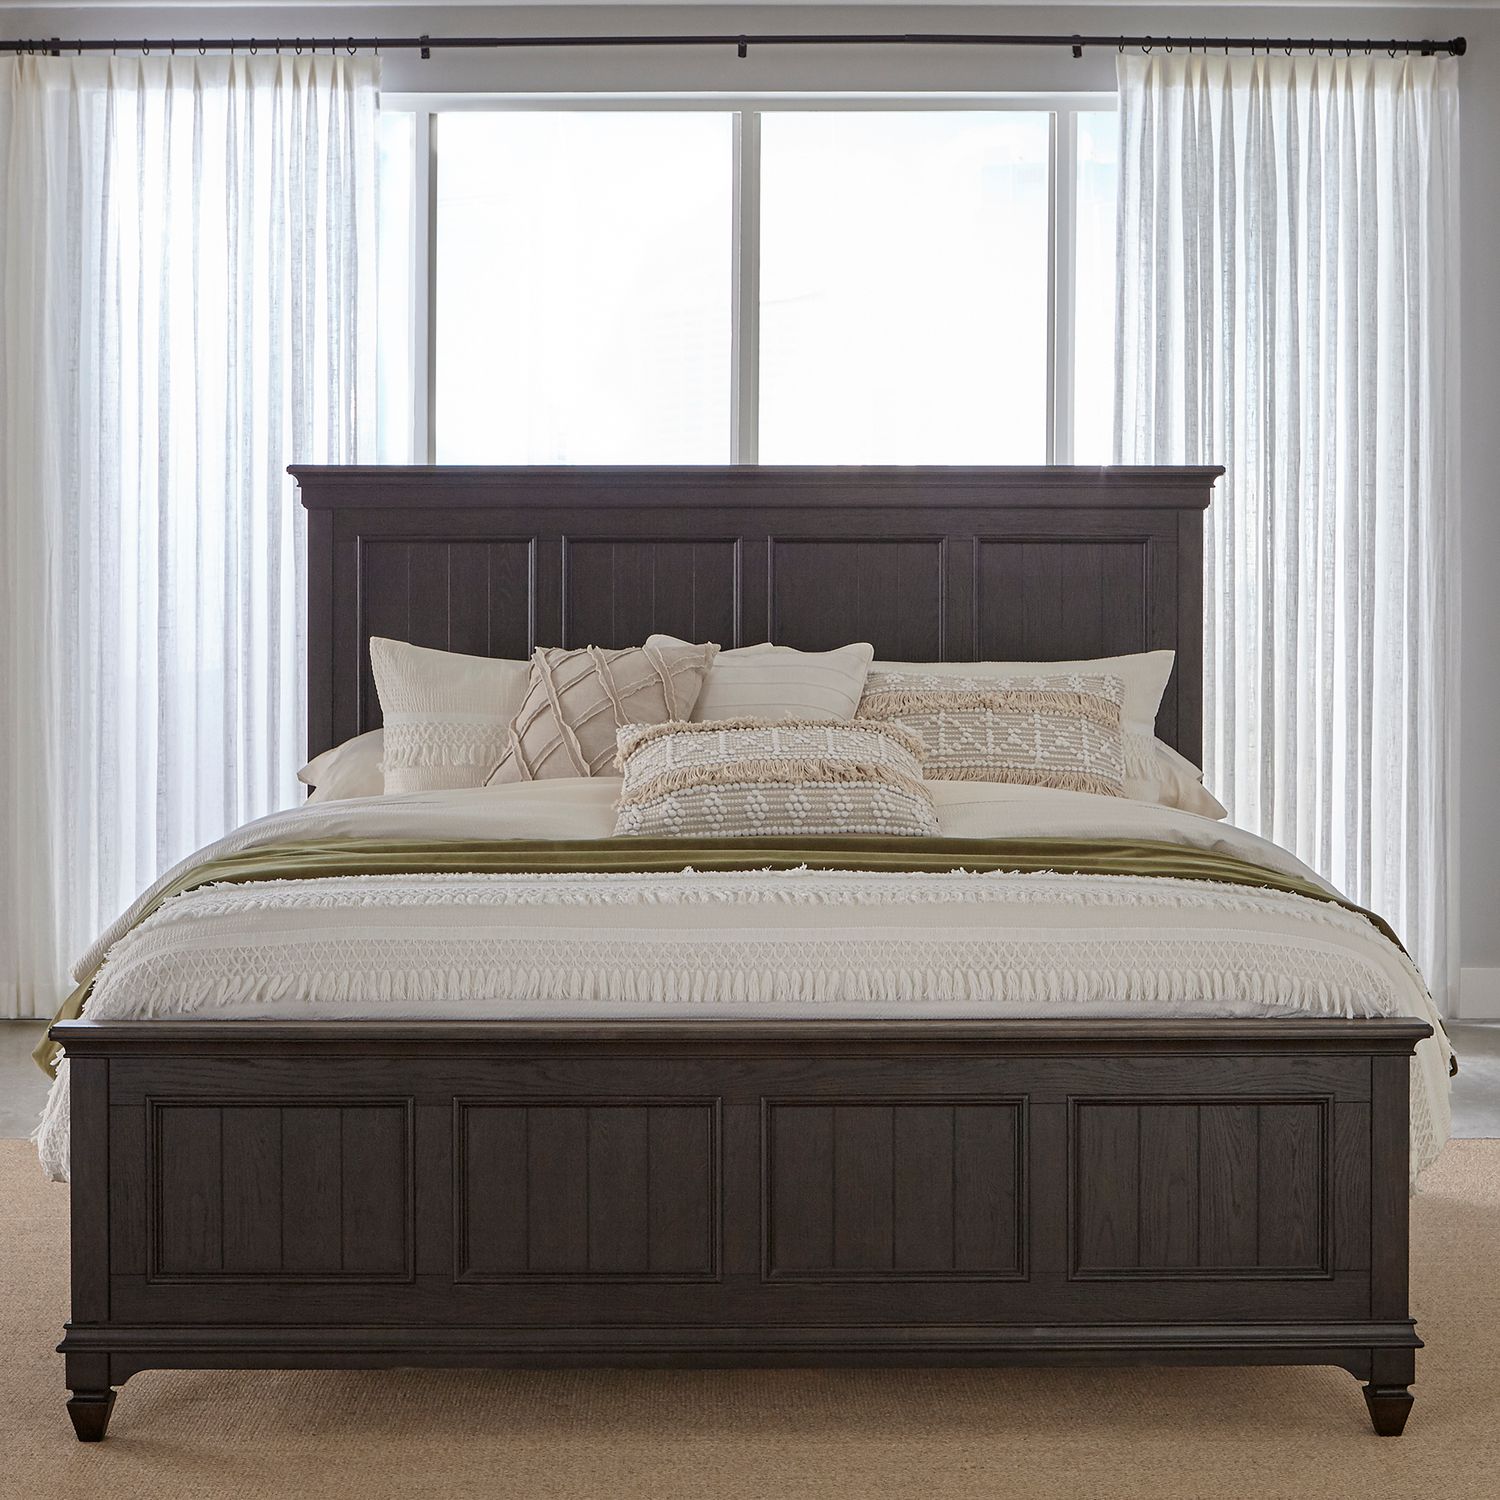 Allyson Park 417B-BR Black Panel Bedroom Collection from Liberty Furniture